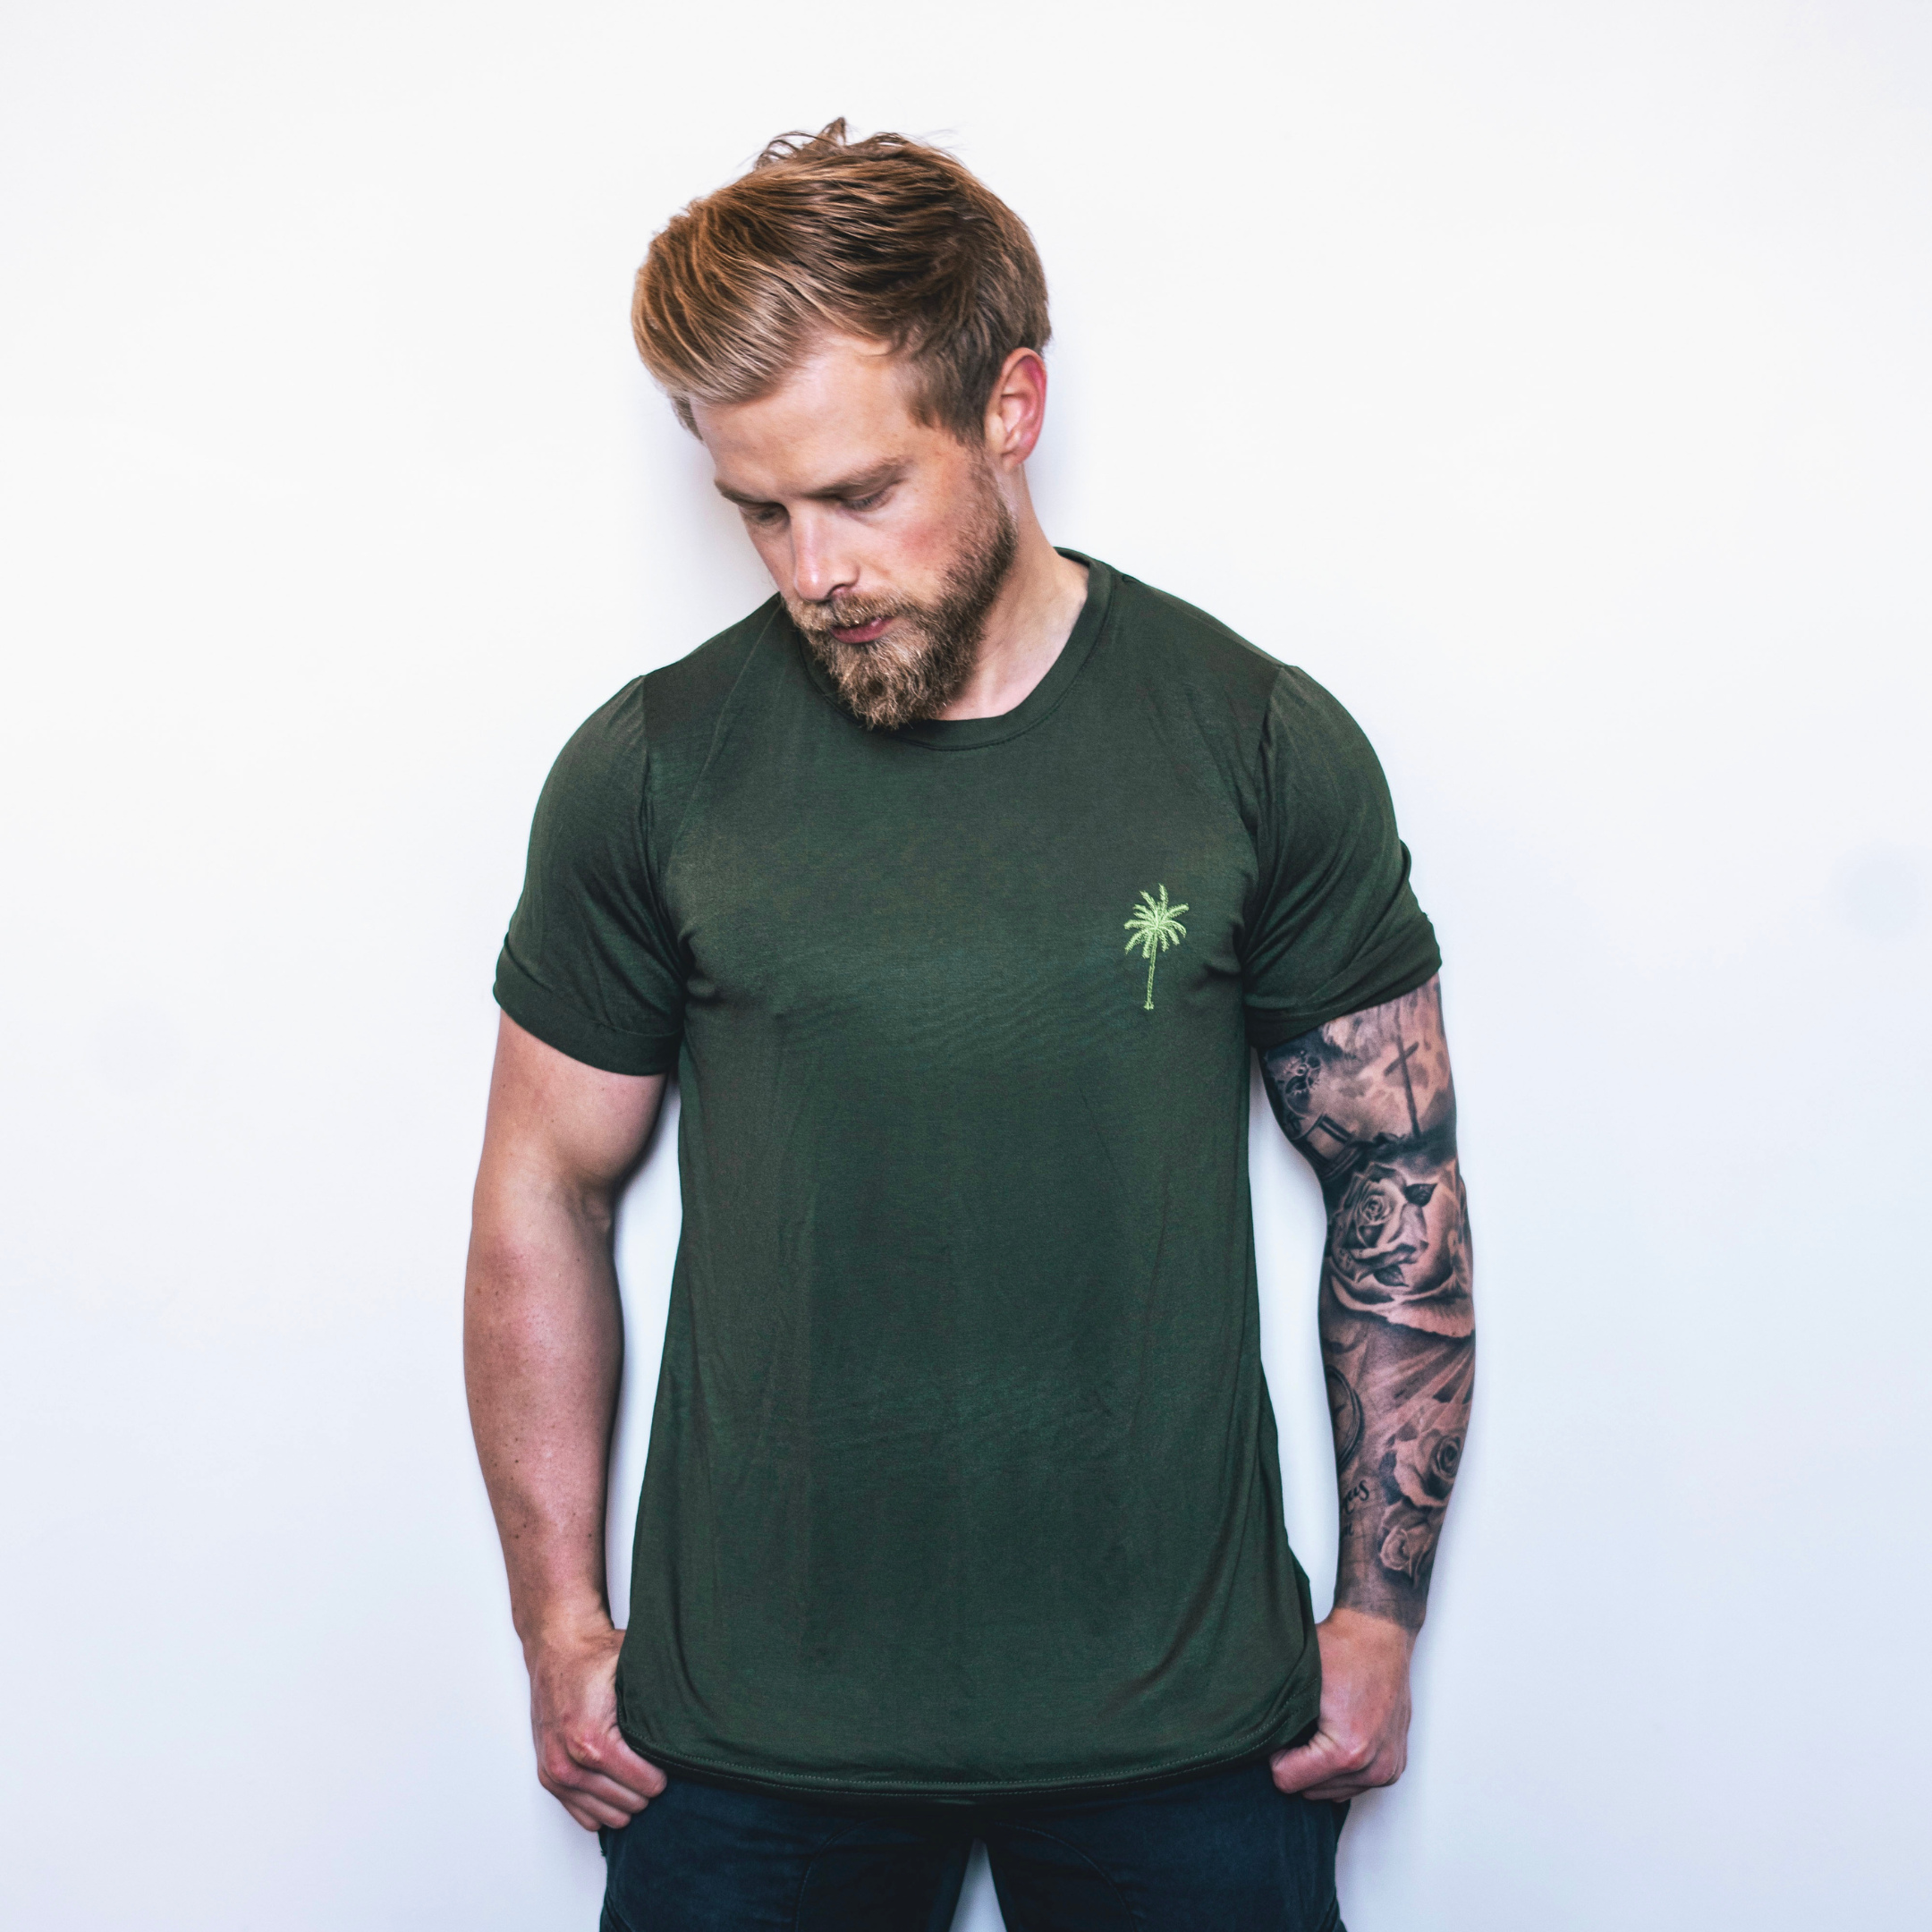 Rolled Muscle Tee - SageStrange ParadiseStrange Paradise
Our Rolled Muscle Tees are designed for everyday wear. Our fabric delivers a product for those with a demanding and versatile lifestyle. From the workplace or gym, Rolled Muscle Tee - Sage